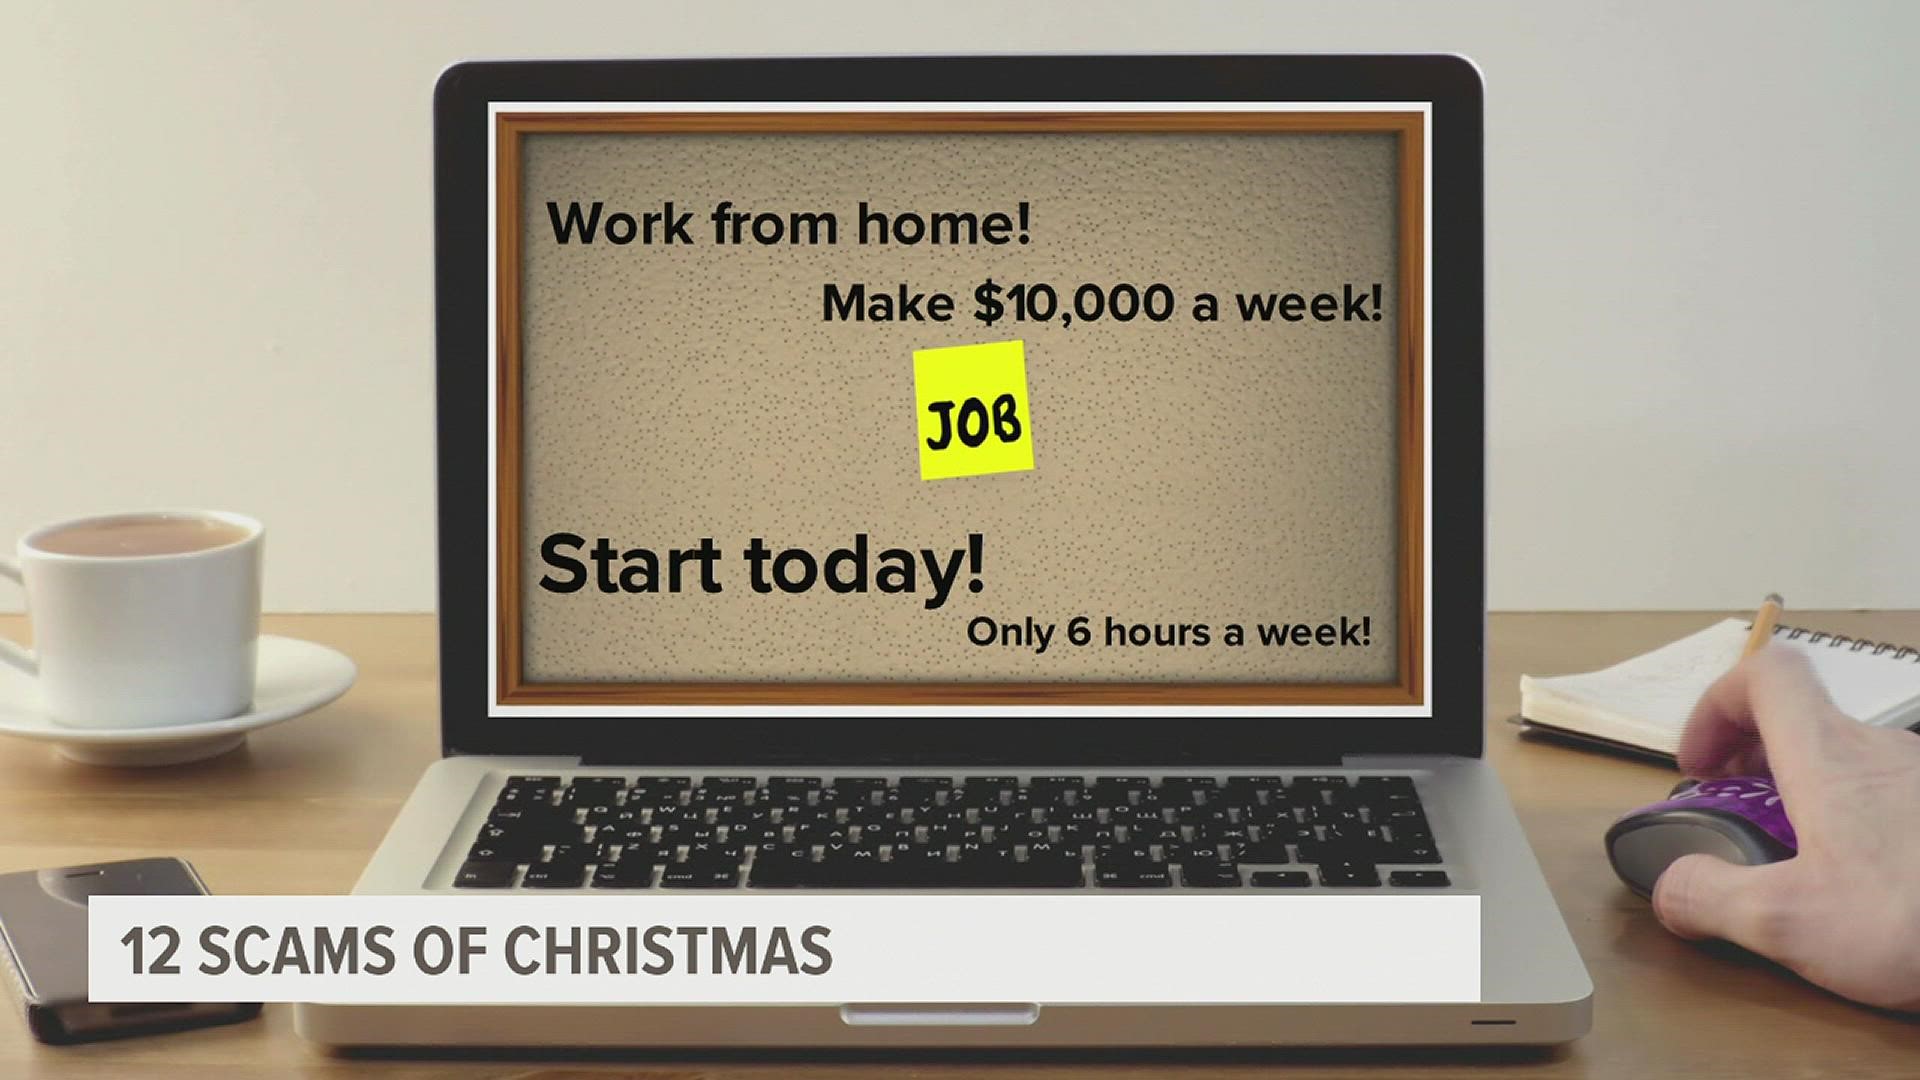 Job scams make the list of 12 scams of Christmas.